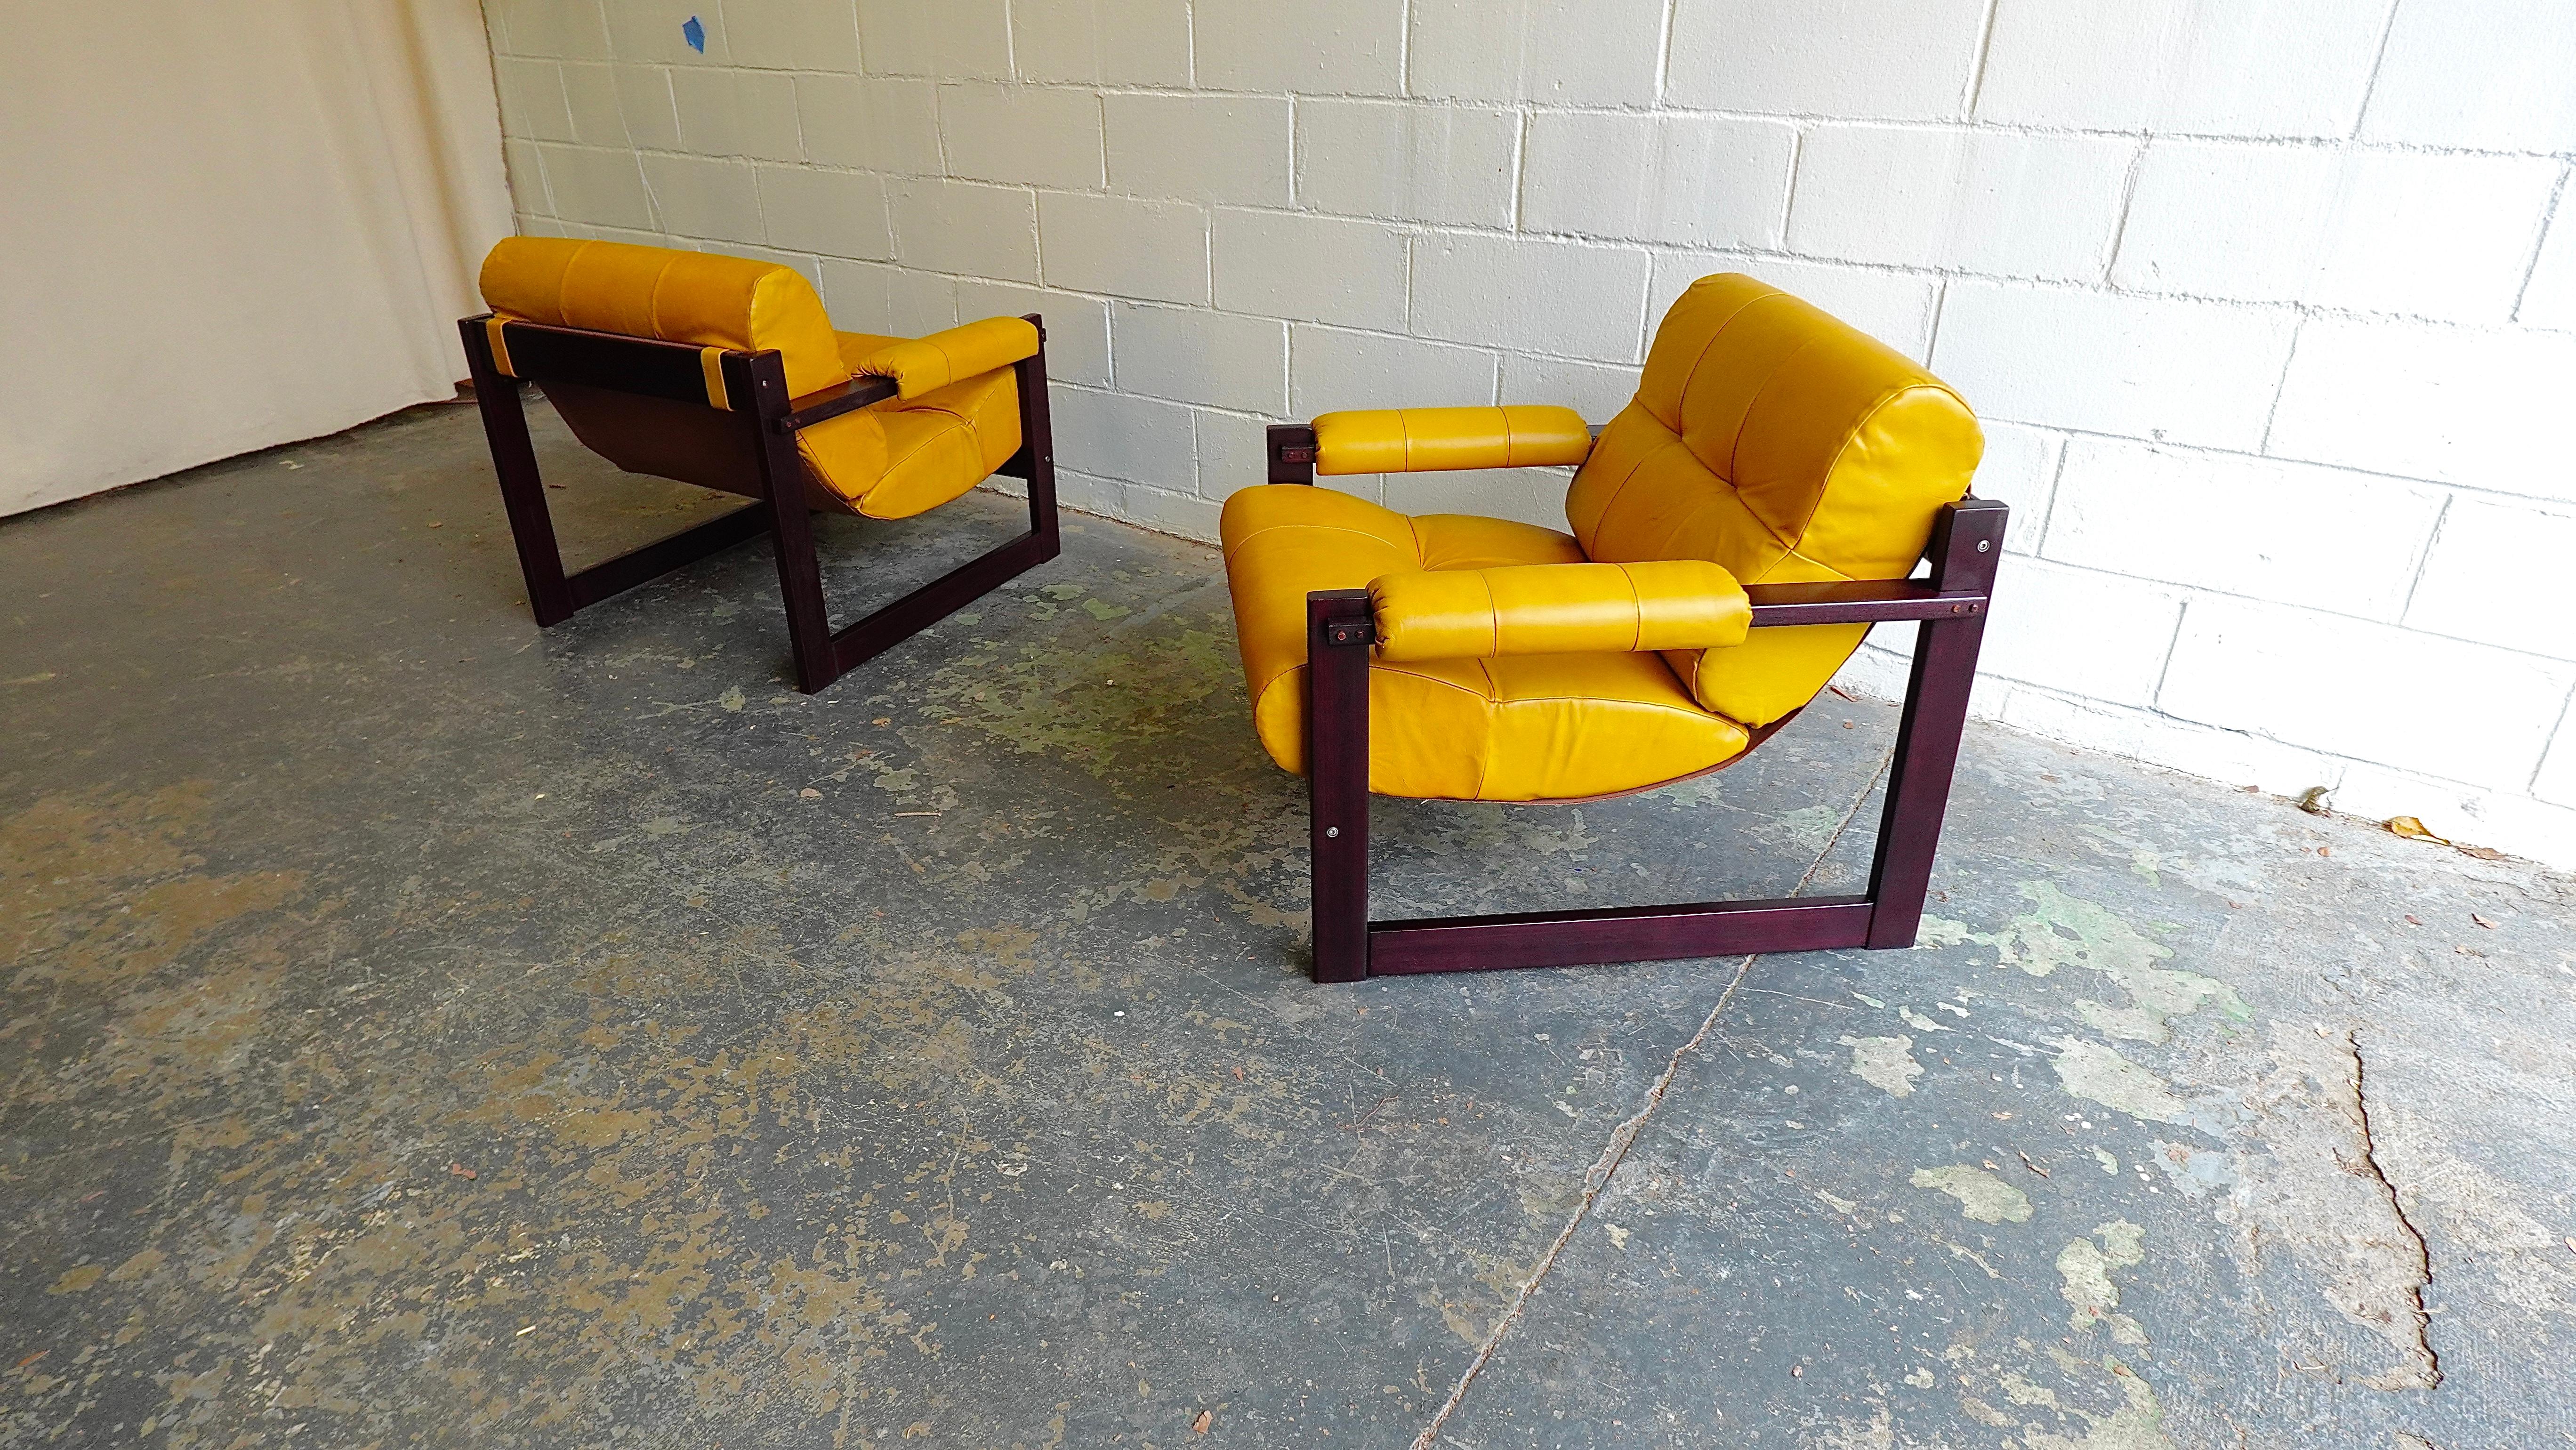 Pr. Percival Lafer MP-167 Lounge Chairs in Jatoba & Leather, 1970s For Sale 9